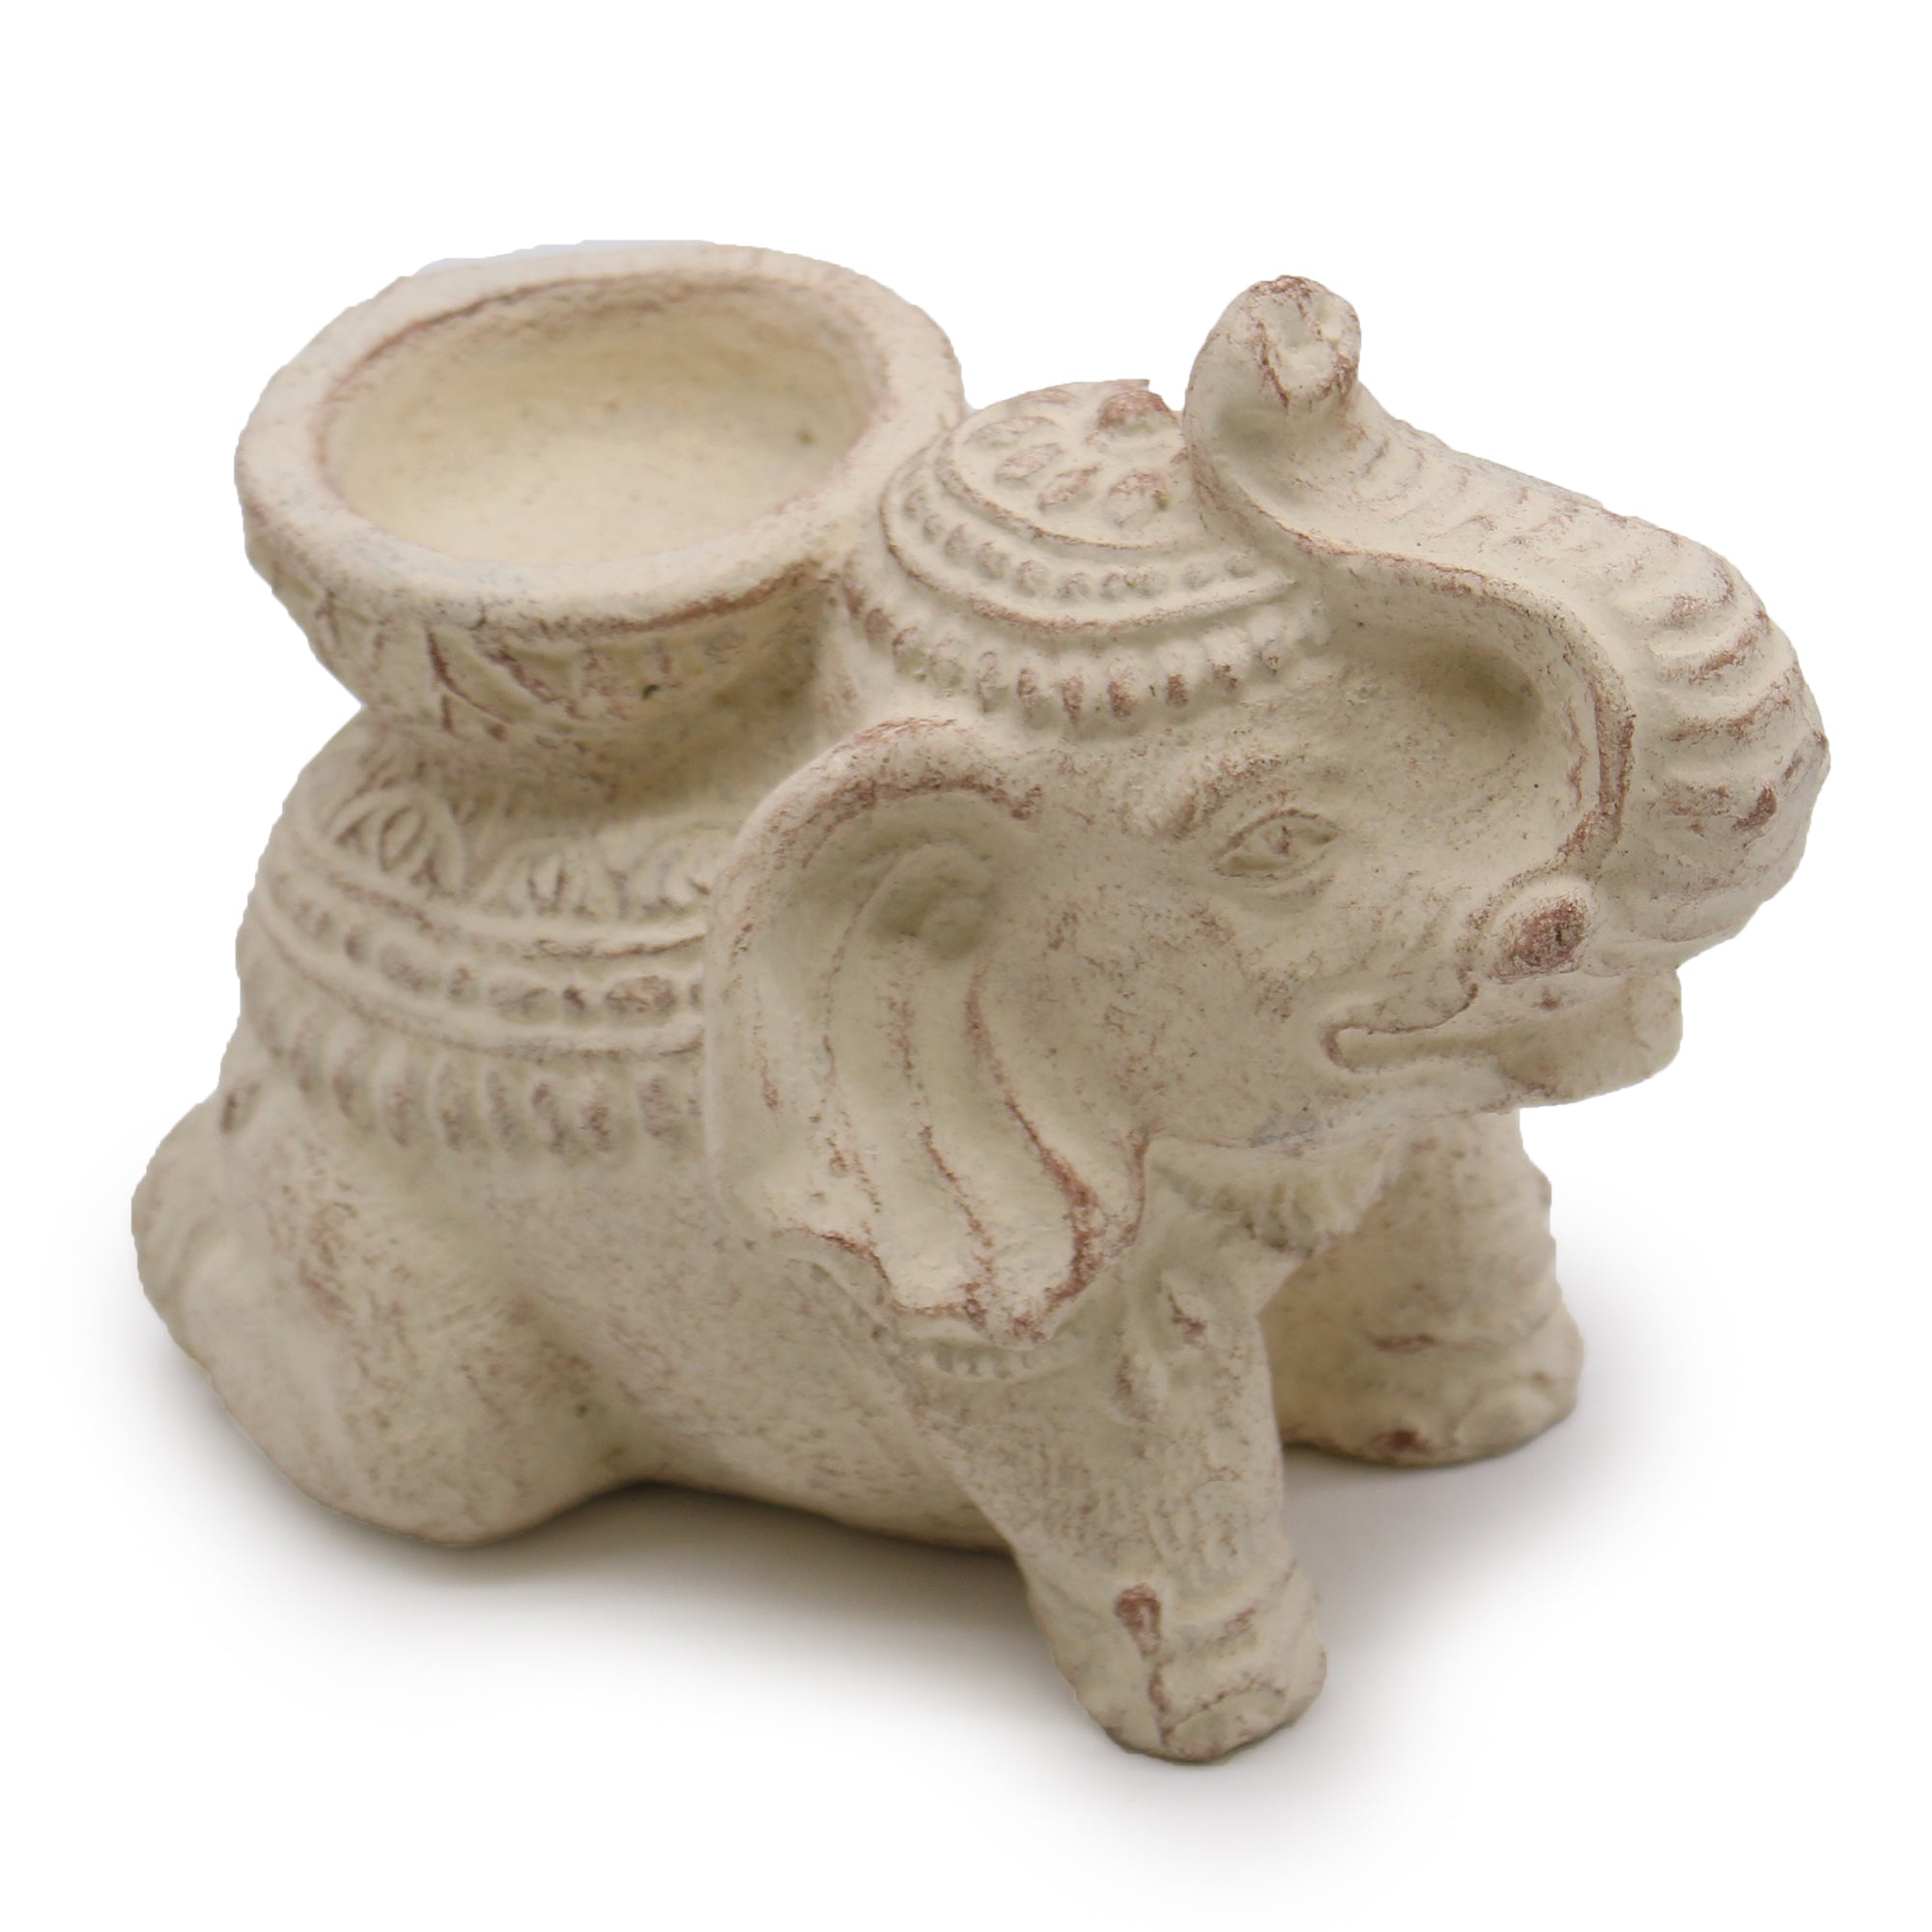 View Elephant Incense Candle Holder cream information